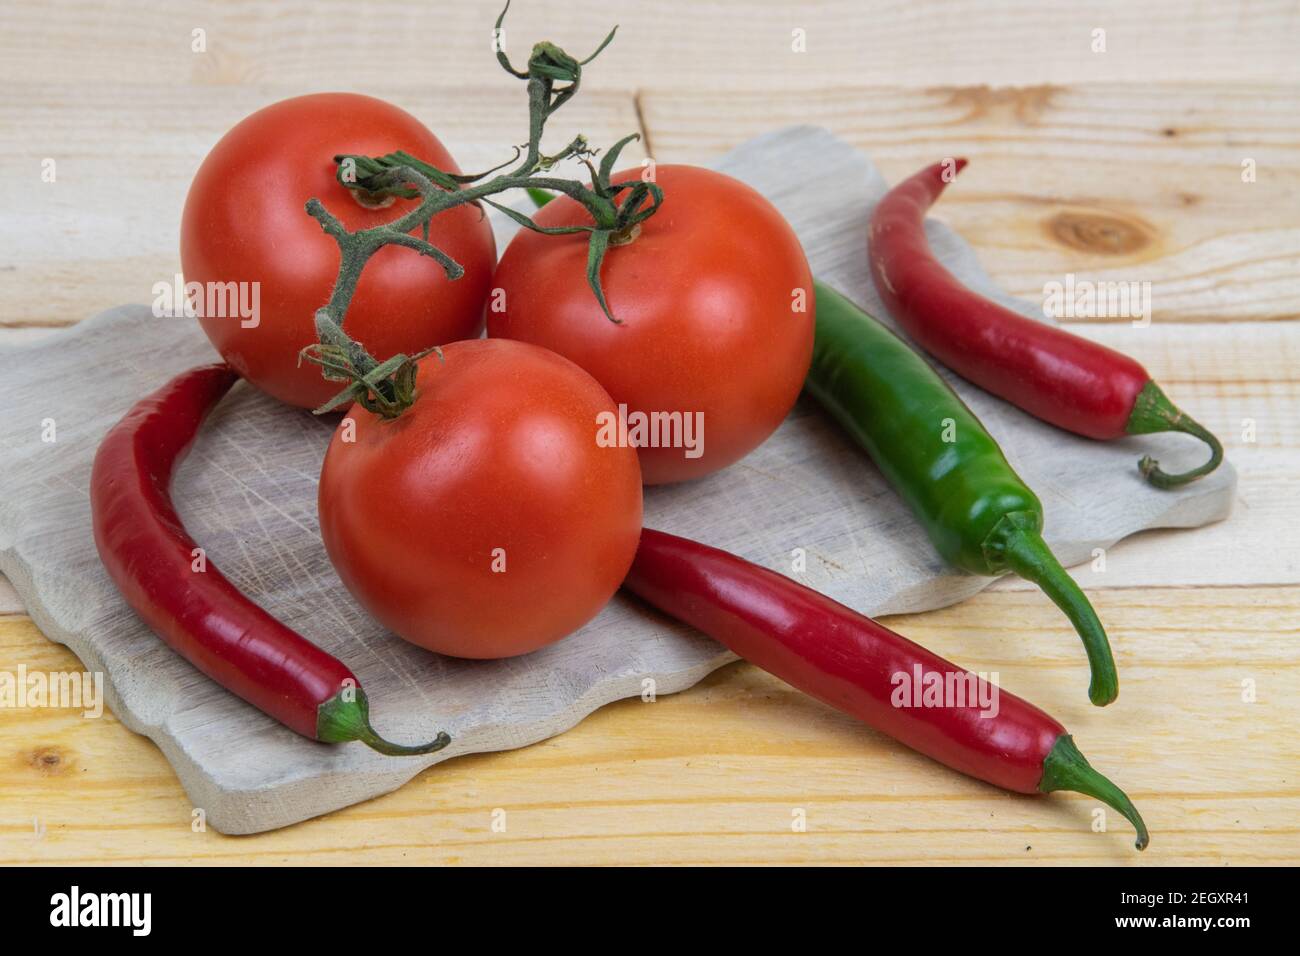 3 tomatoes and 4 hot peppers on a wooden board. Stock Photo